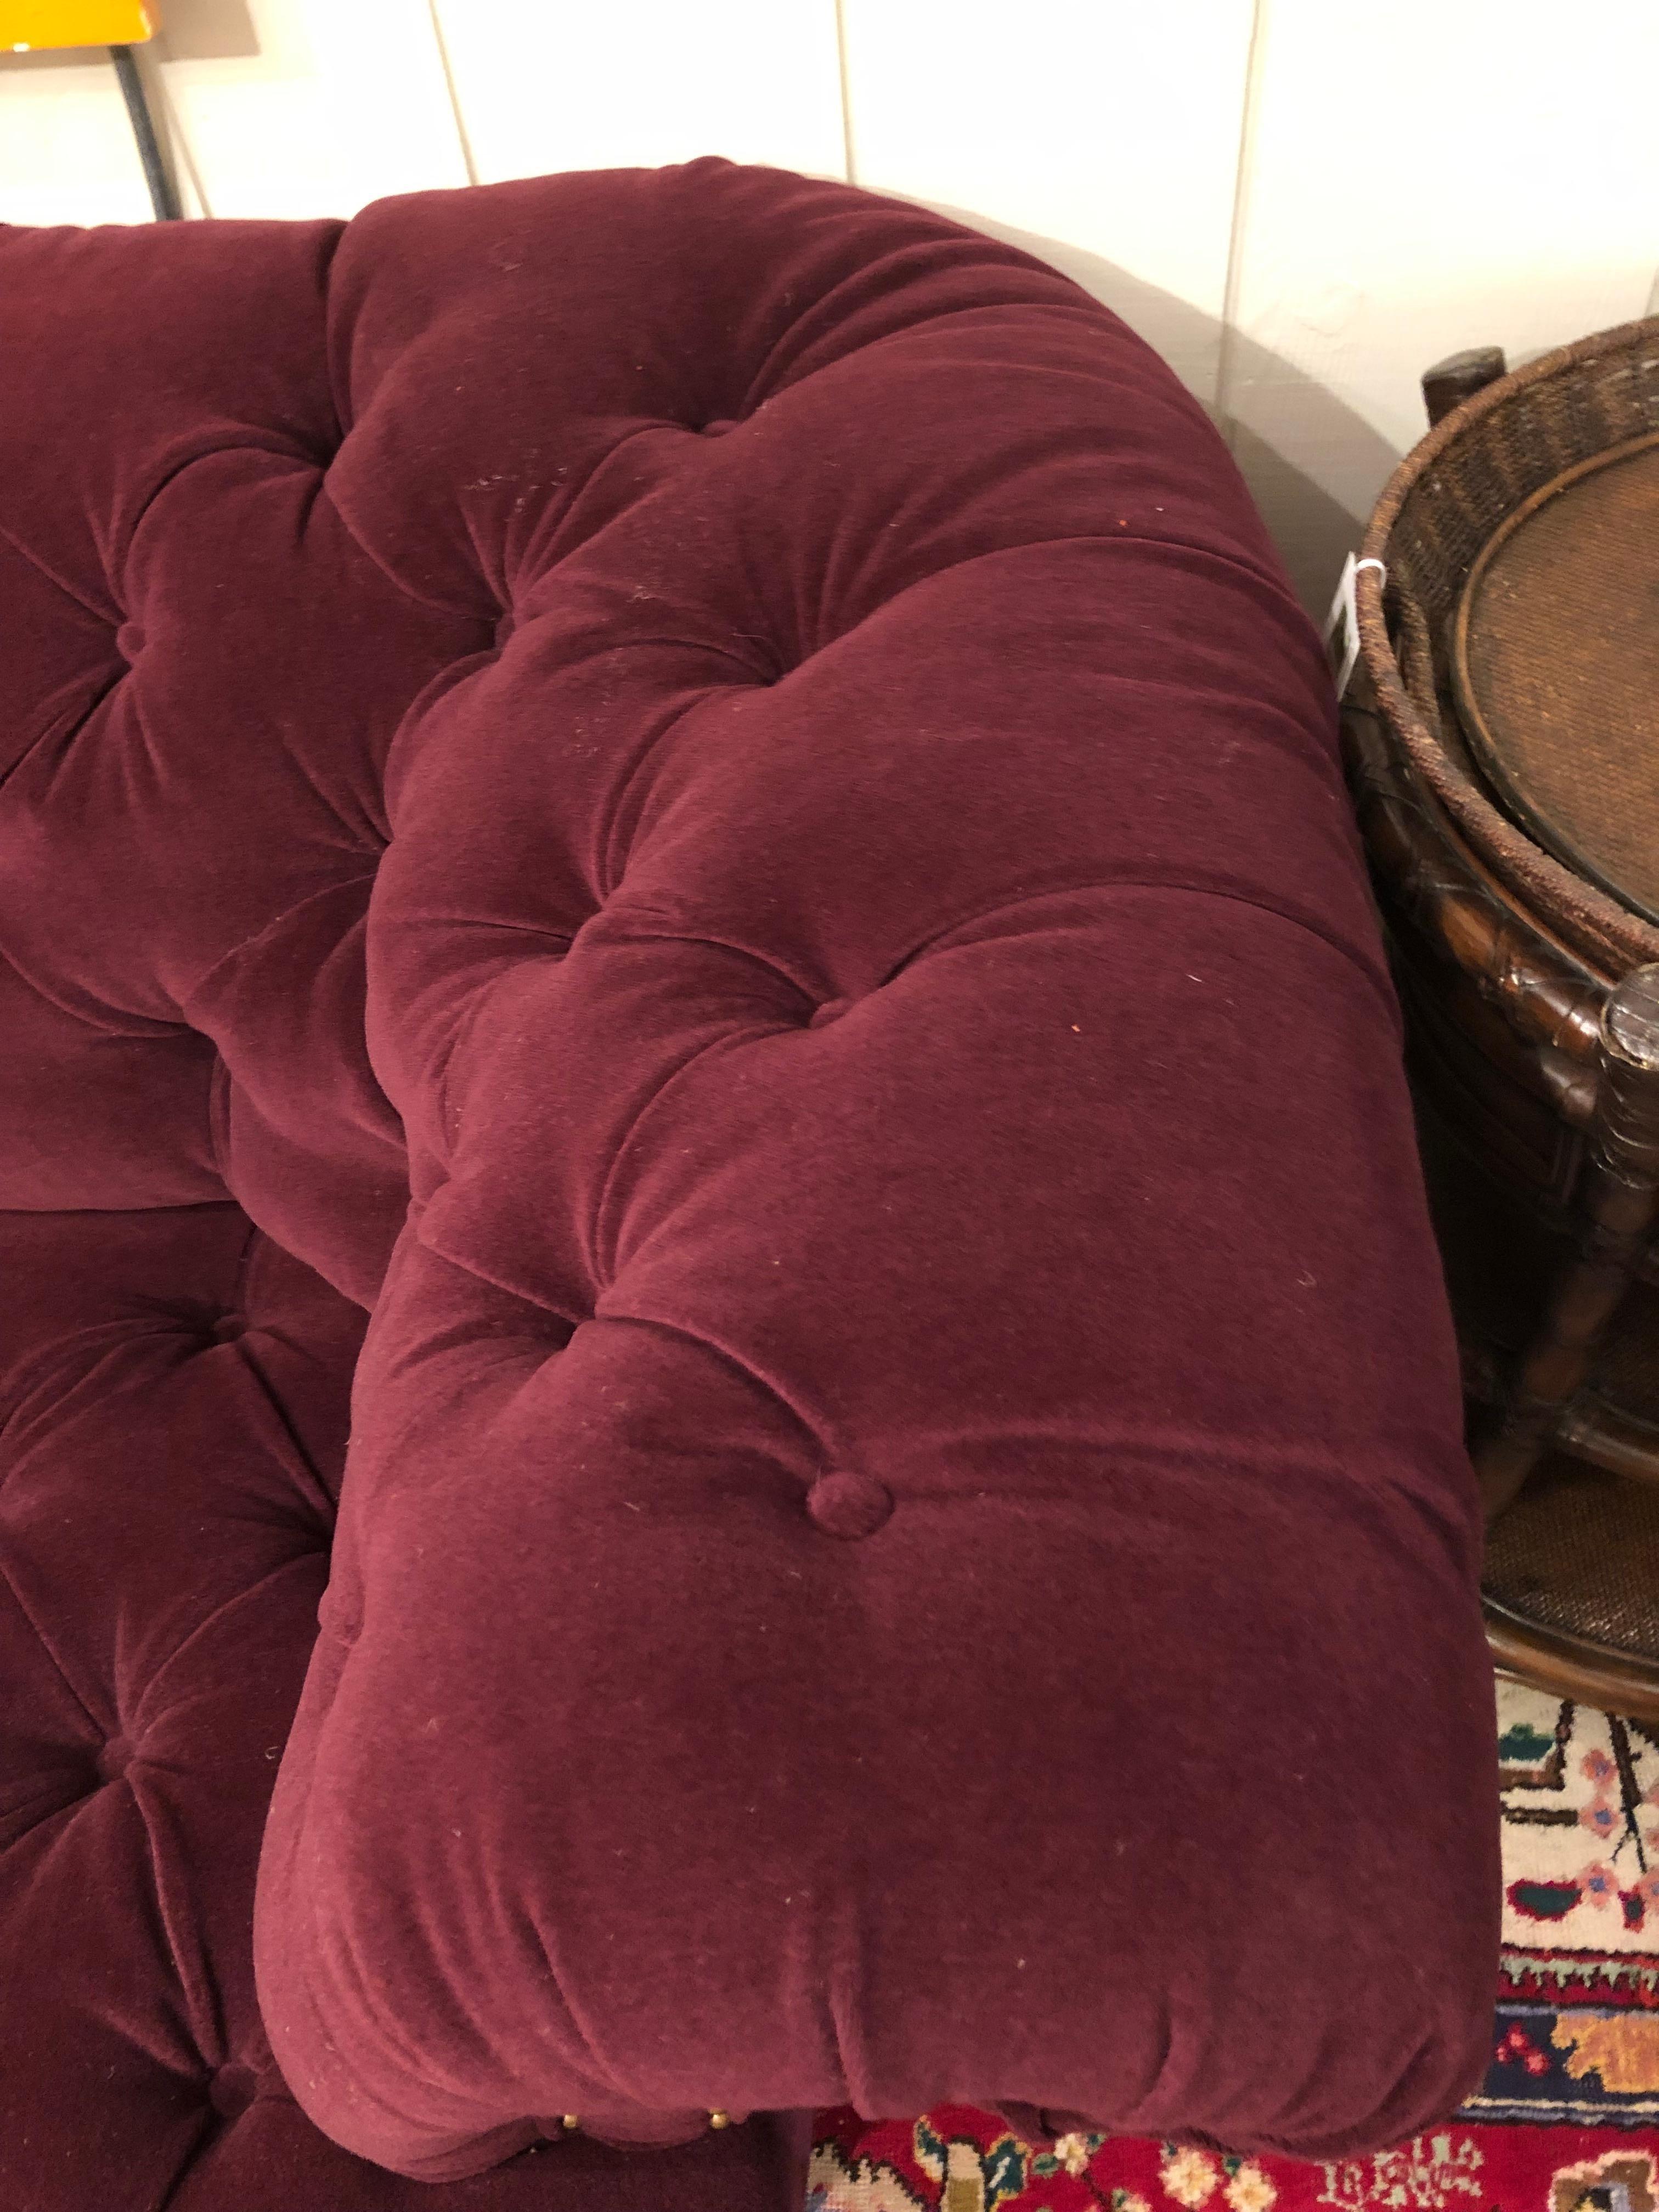 Luxurious Large George Smith Chesterfield Sofa Upholstered in Purple Mohair 1